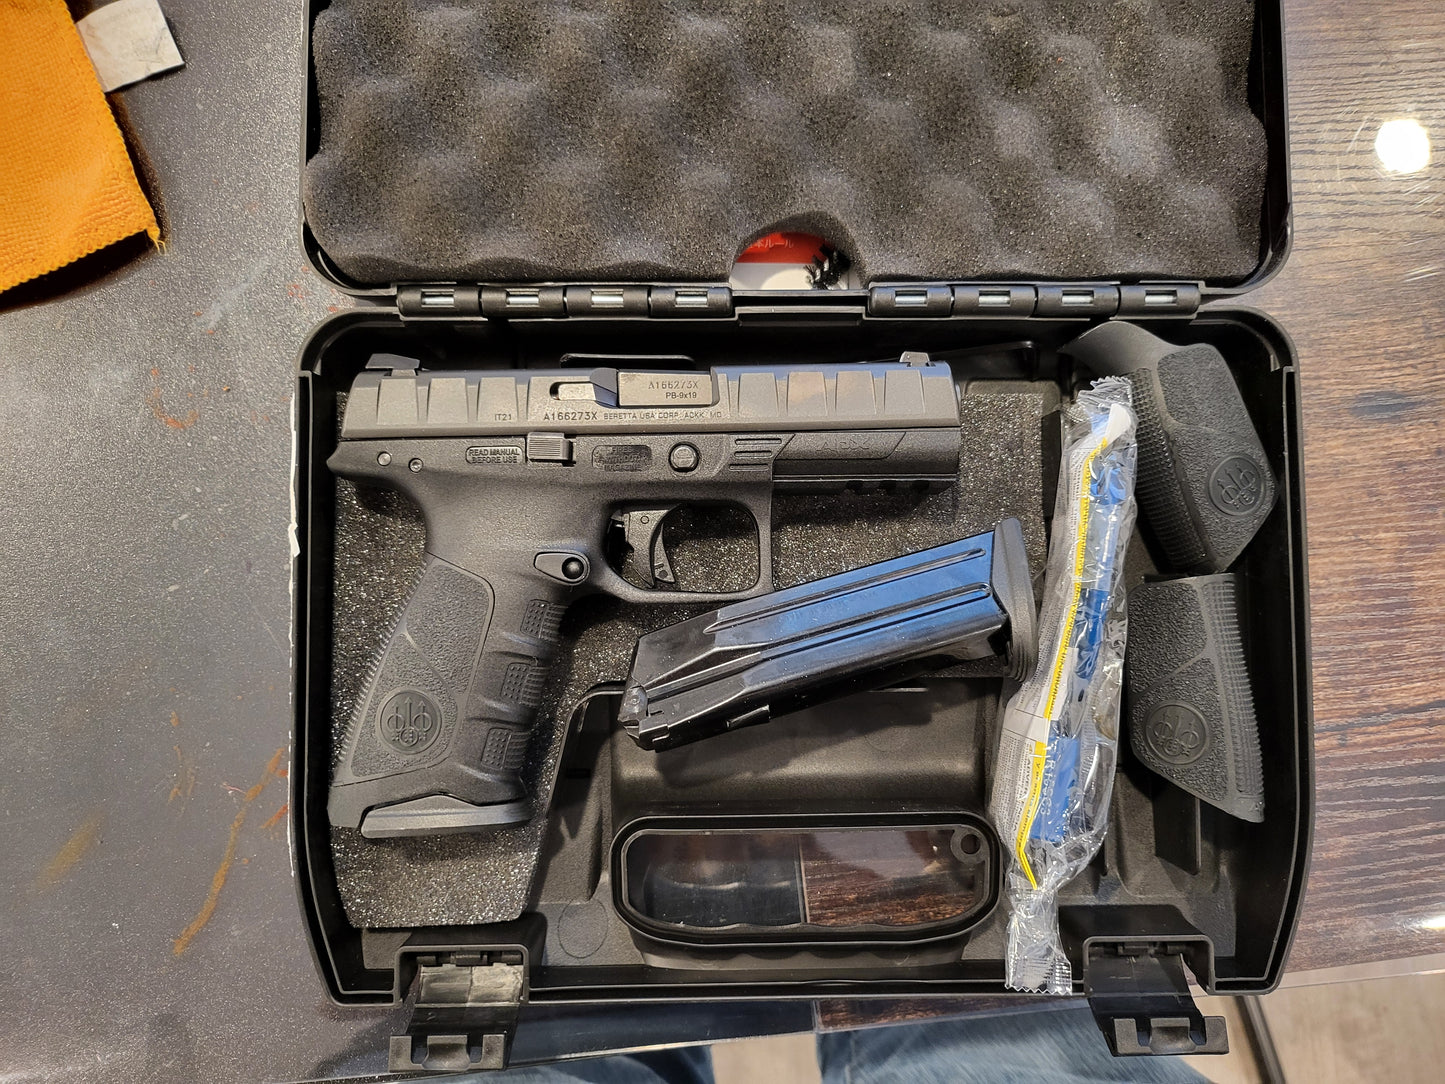 Beretta APX 9MM 4.25" Pistol 17 round 2 mags complete